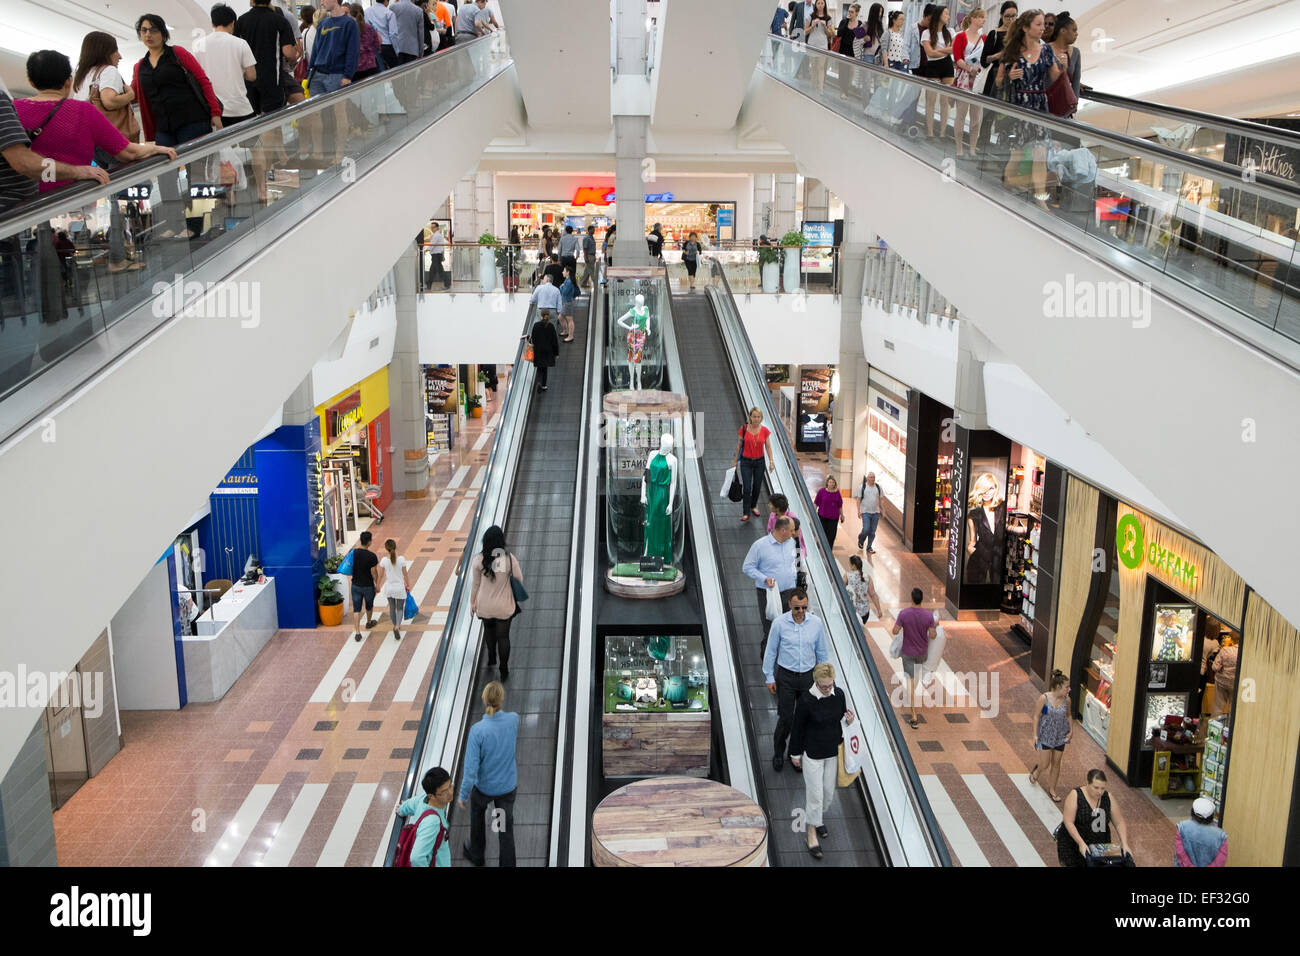 Broadway shopping centre, near chippendale in Sydney,Australia Stock Photo